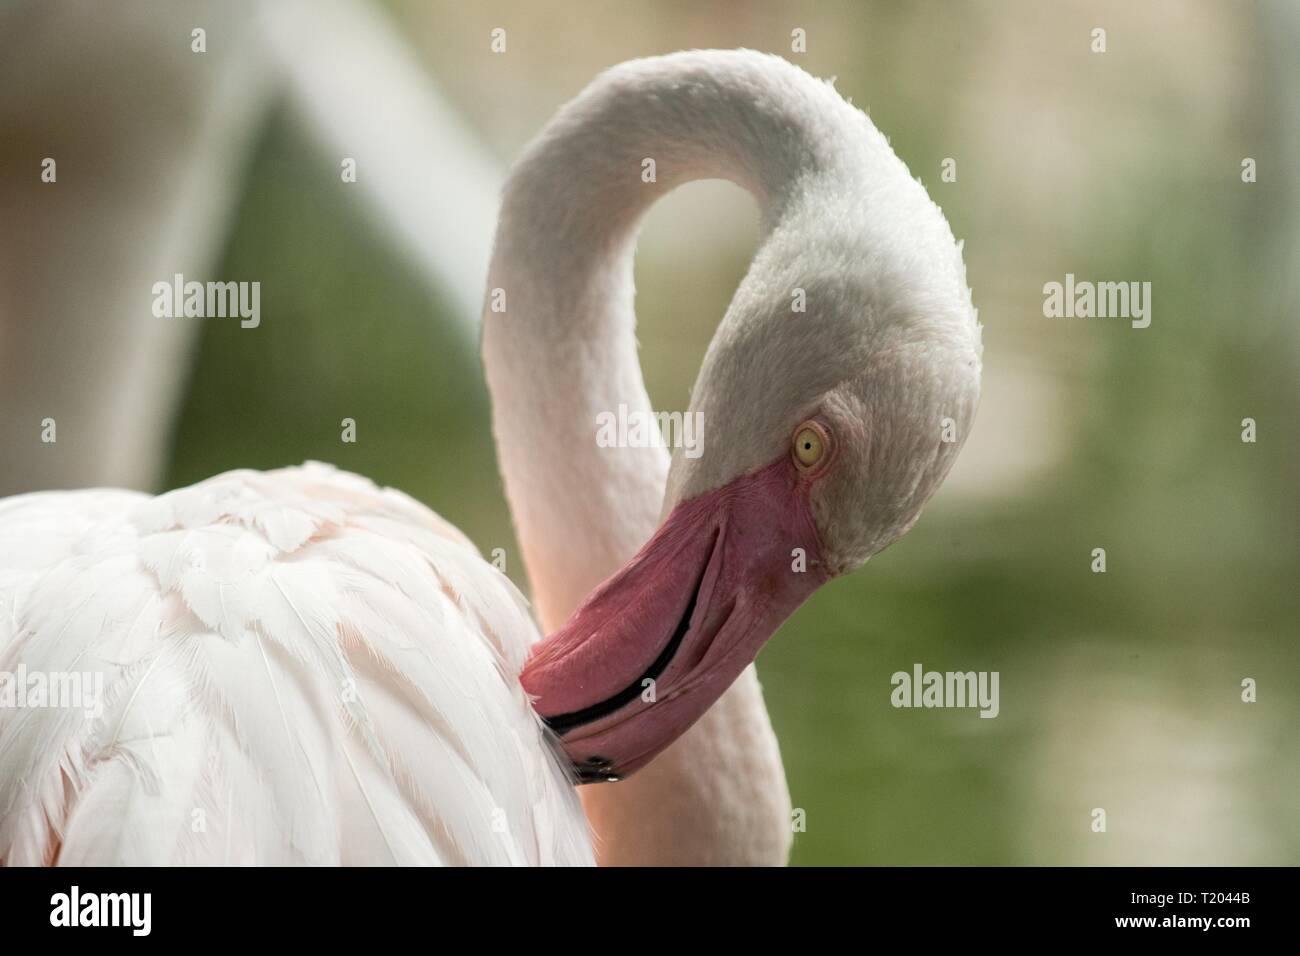 Pink flamingo at the zoo, solo flamingo (phoenicopterus) grooming its feathers, beautiful white pinkish bird near pond, water bird in its enrironment, Stock Photo